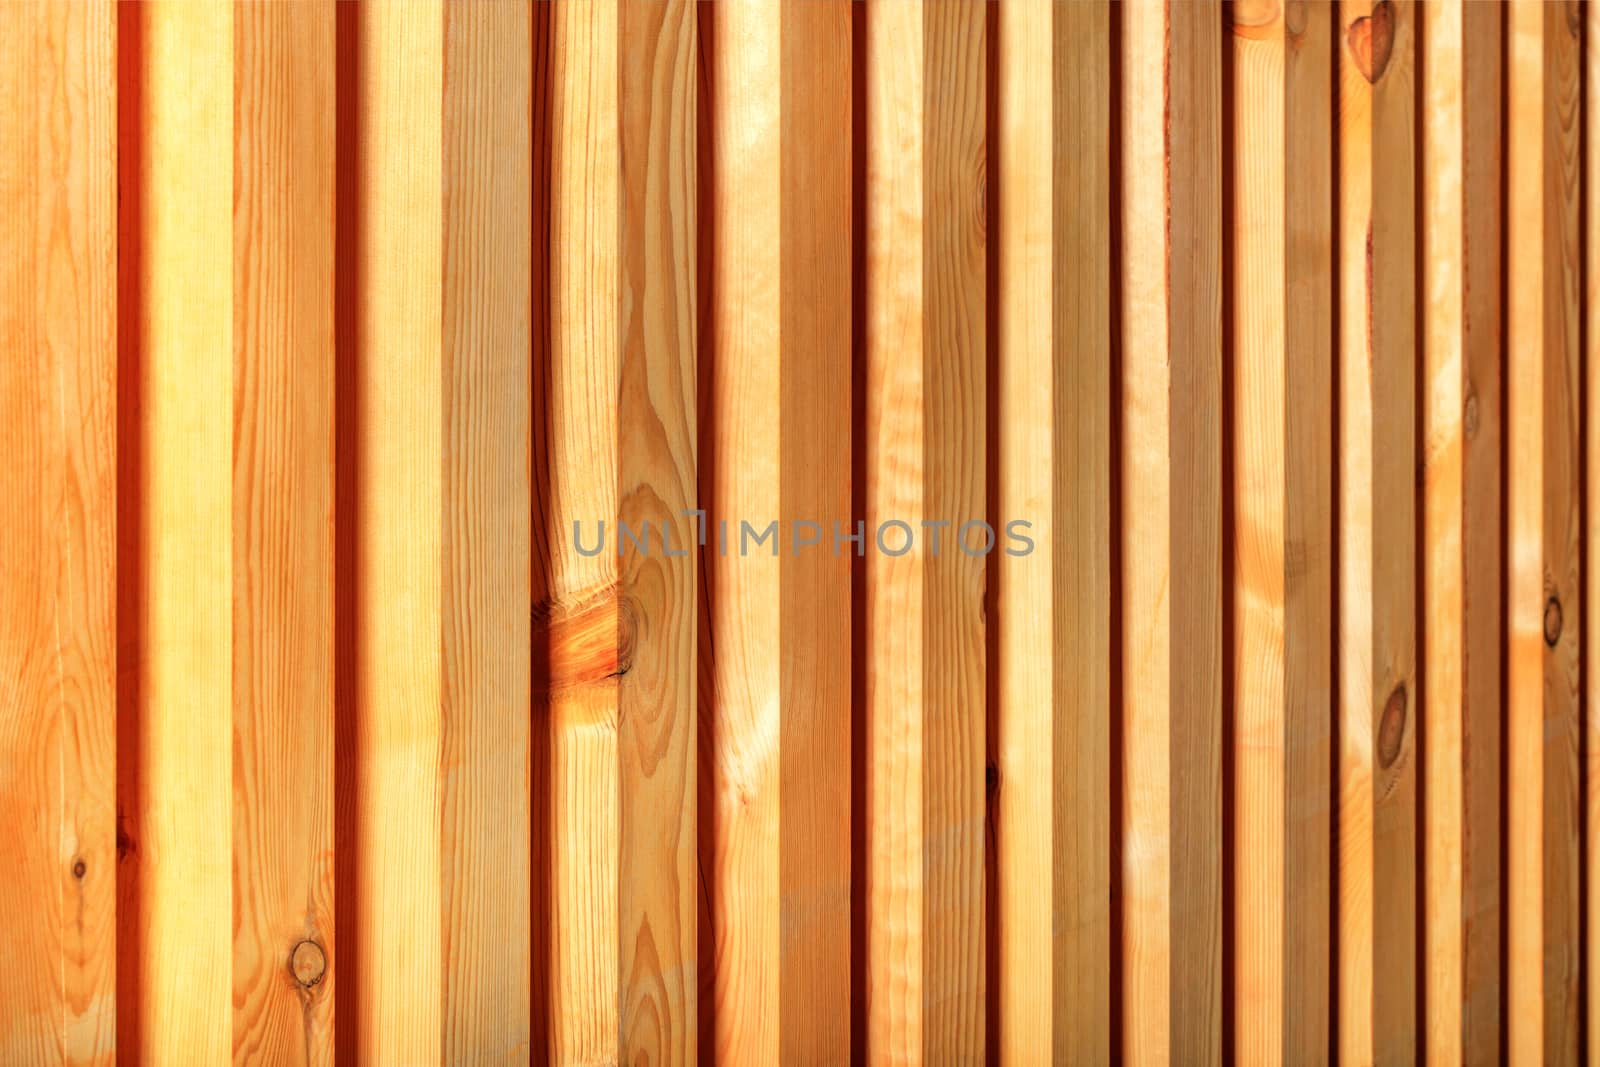 A wooden fence with a ribbed texture, a beautiful tree pattern in the form of smooth trunks with vertical guides.